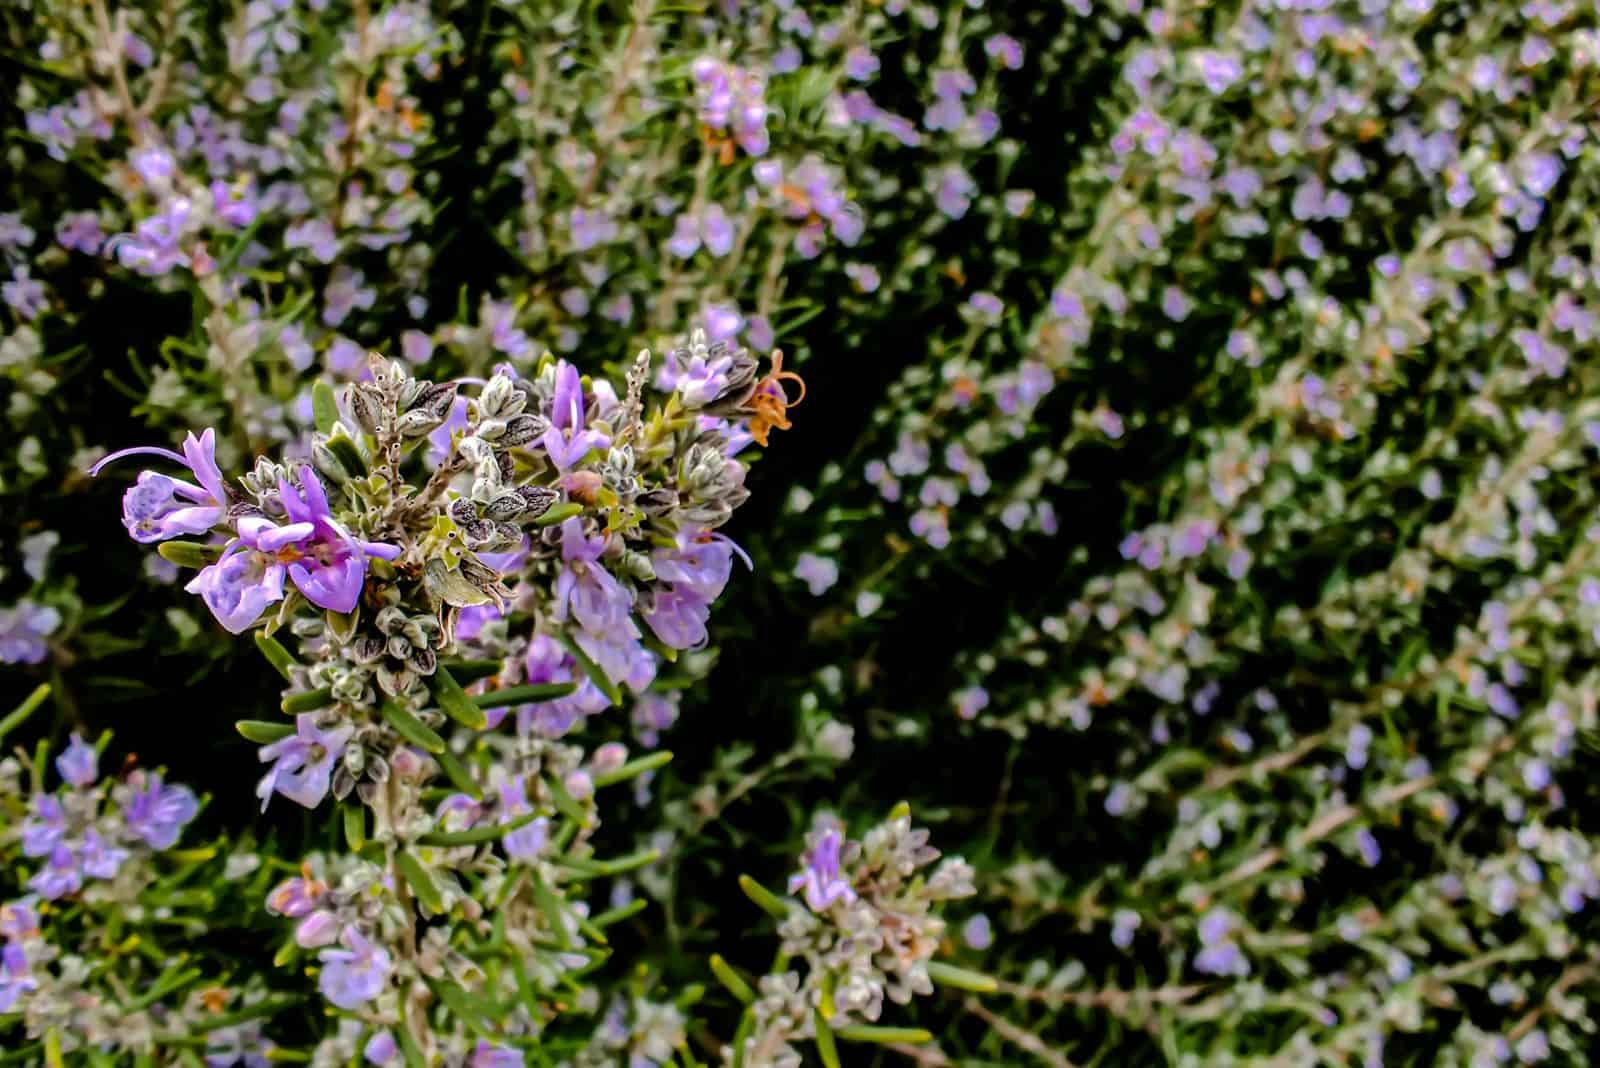 Rosemary with purple flowers